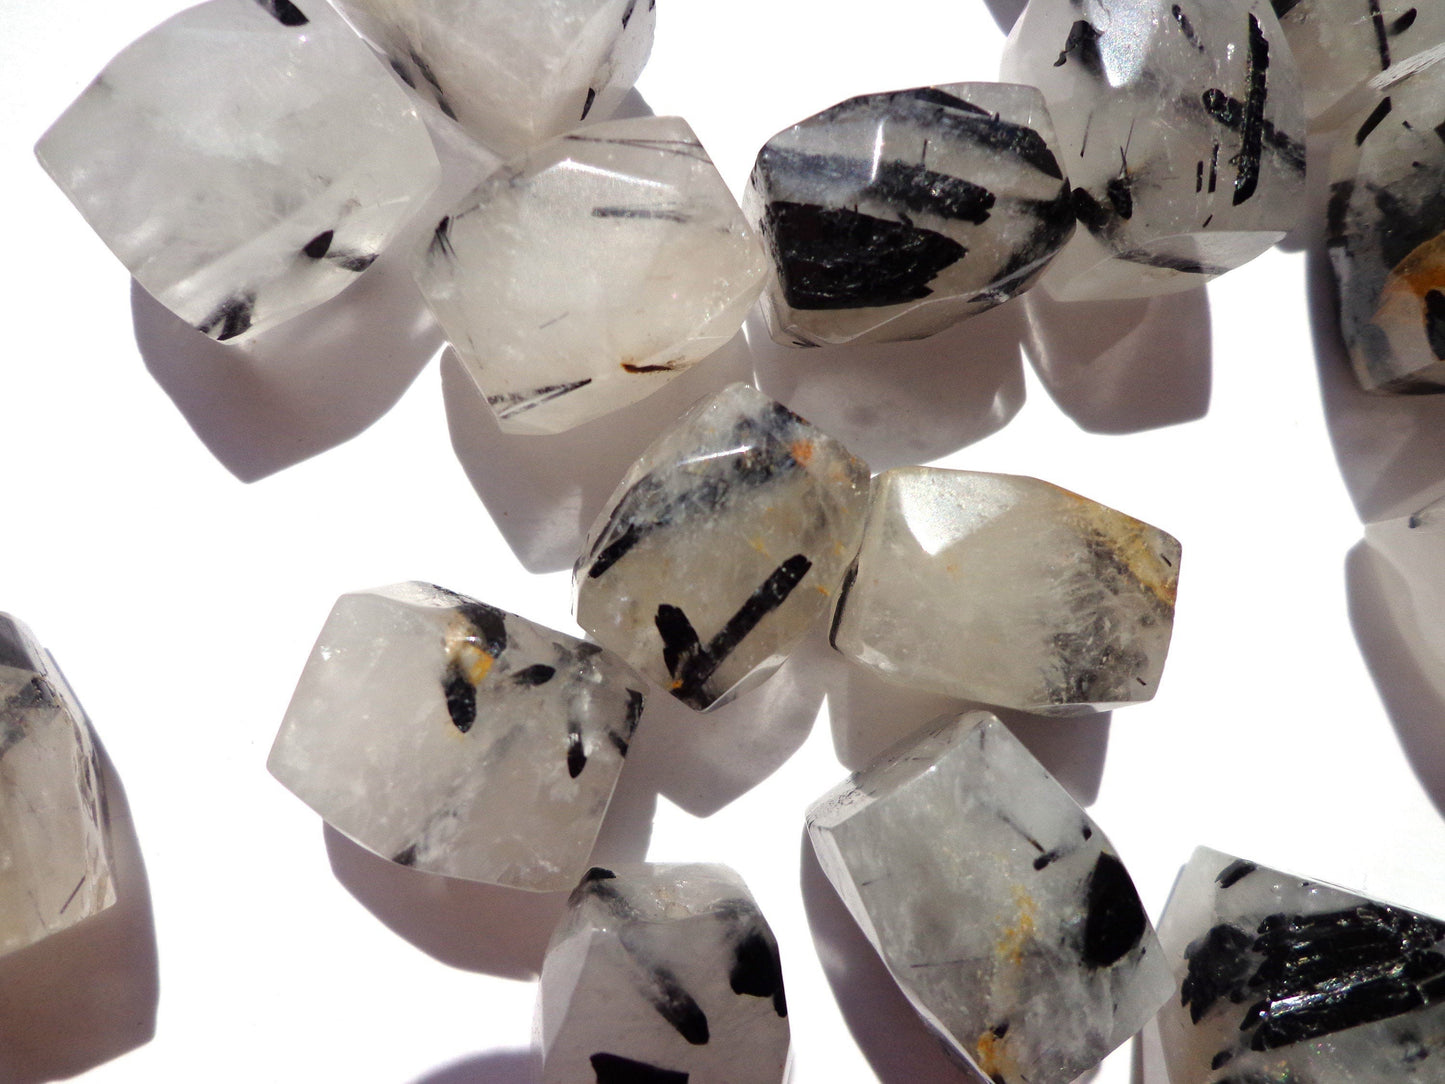 NATURAL Gemstone Tourmalated Quartz, Rectangle Faceted, 15x11mm, Beautiful White Color! Great Gemstone Quality!!